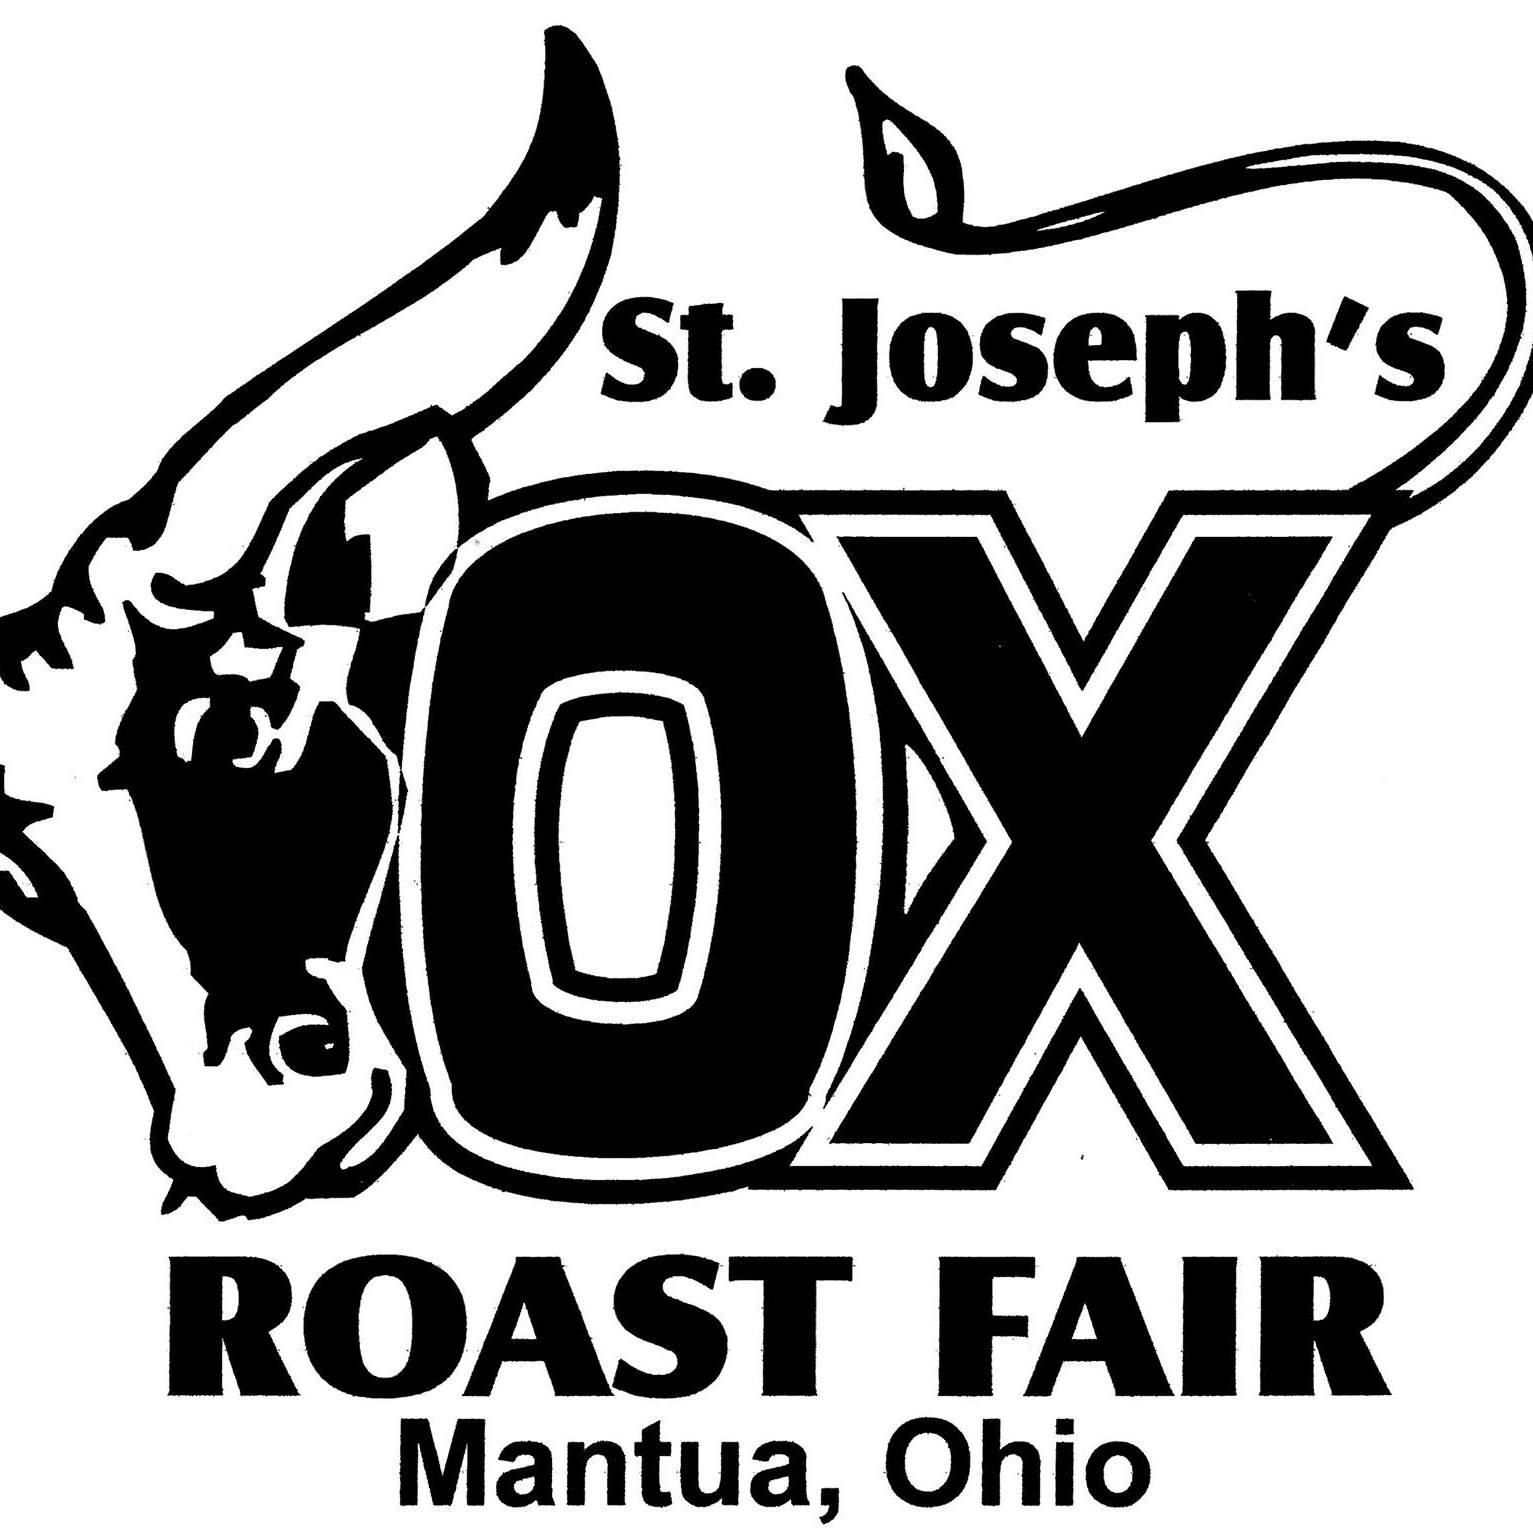 St. Joseph’s Ox Roast Fair The Catholic Diocese of Youngstown